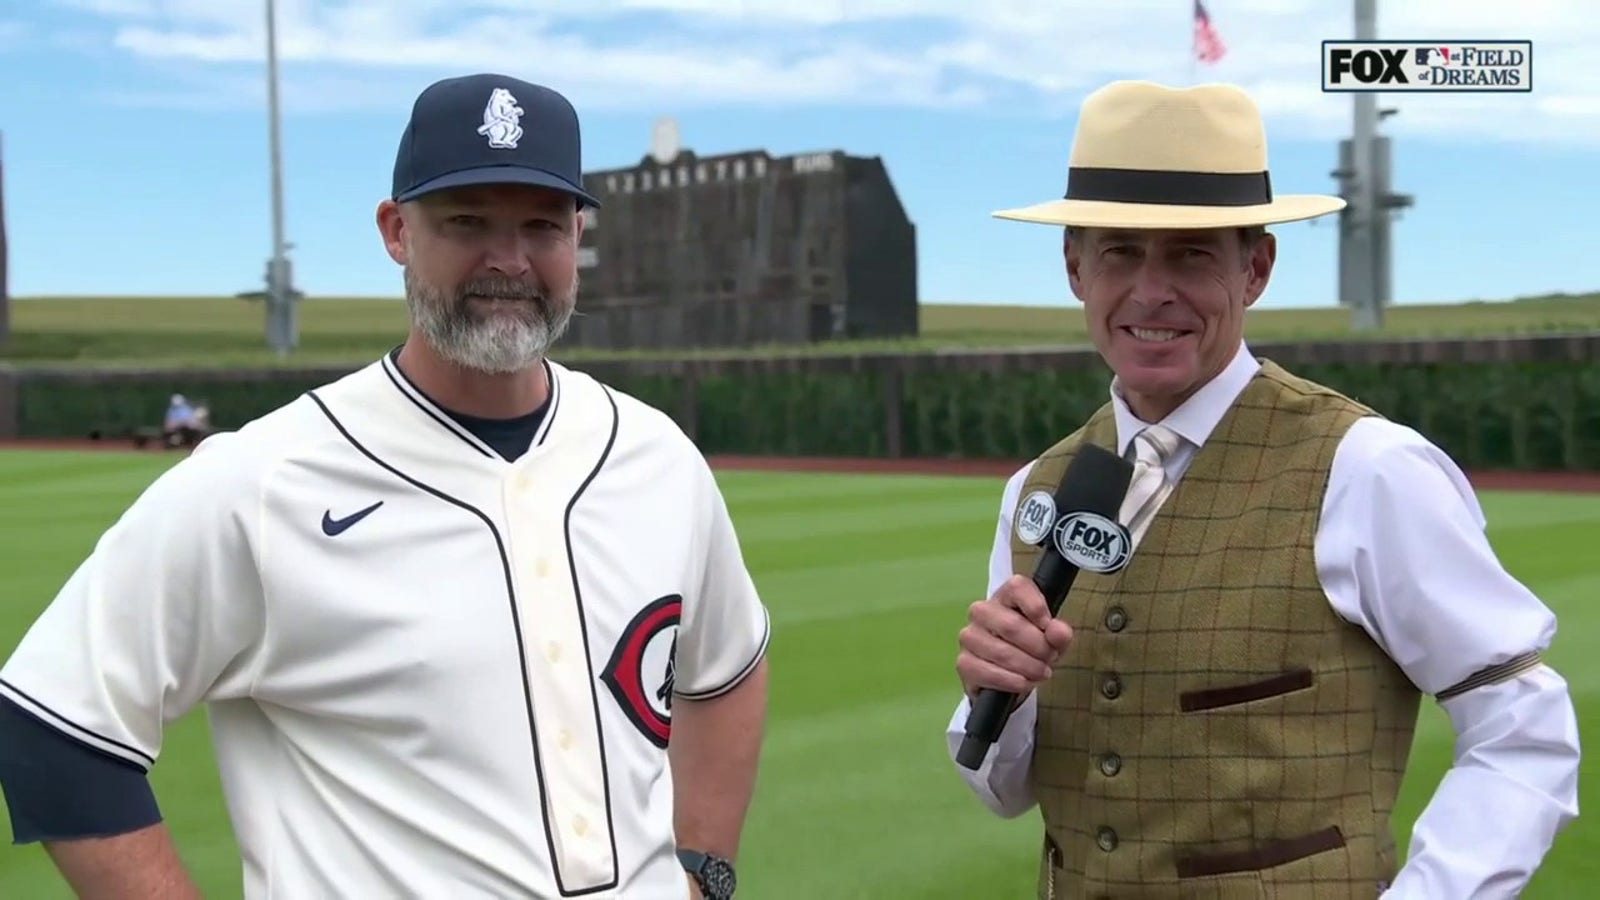 Cubs' manager David Ross on the significance of the Field of Dreams Game